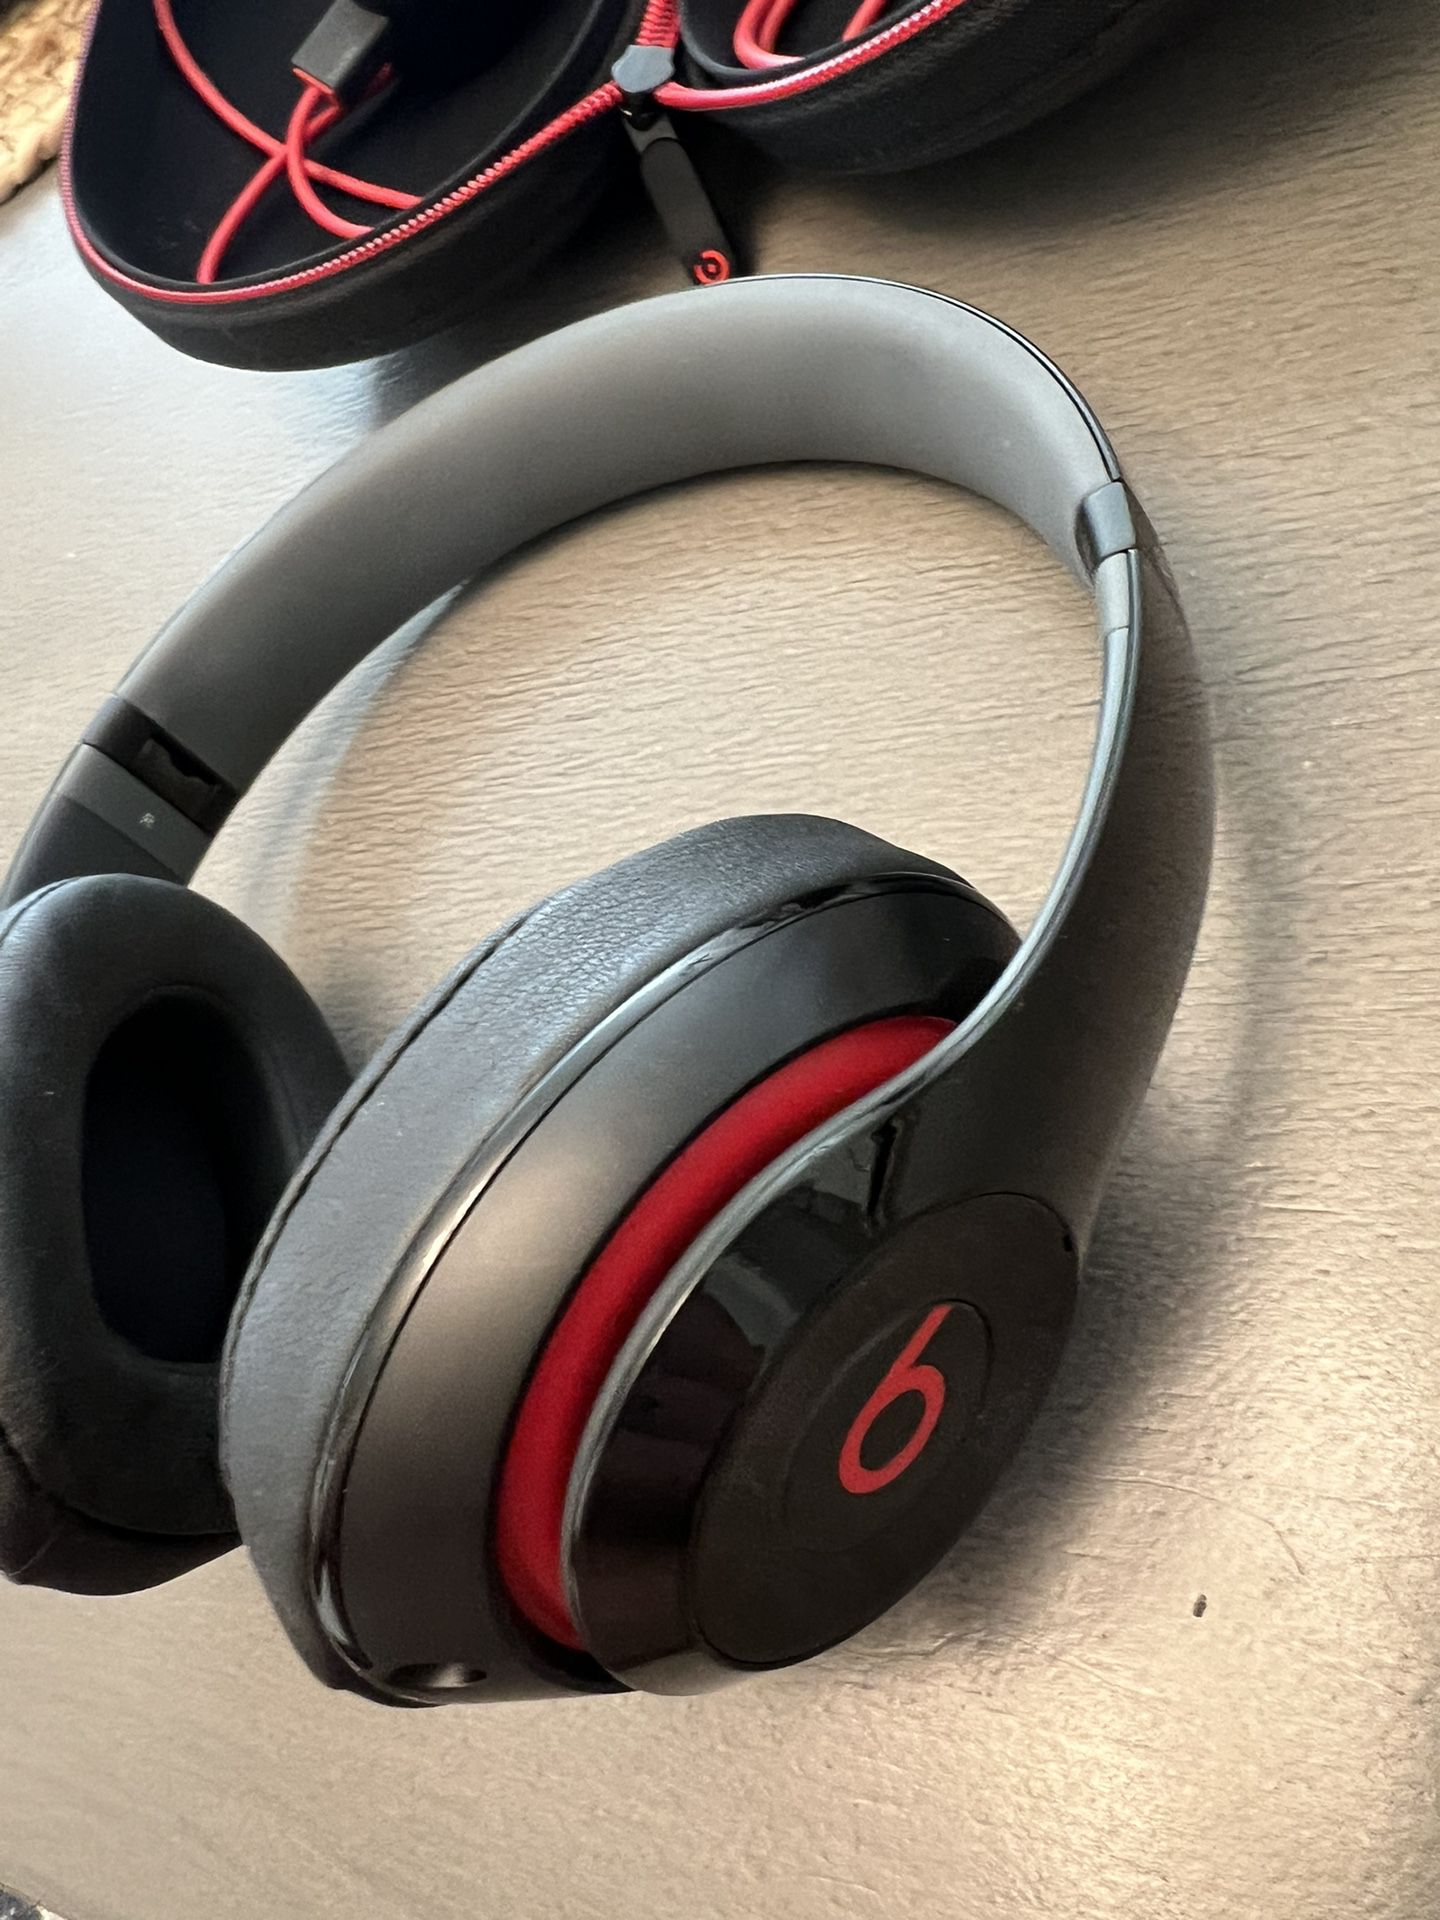 **NEW Beats By Dre 2.0 B50500 Wired